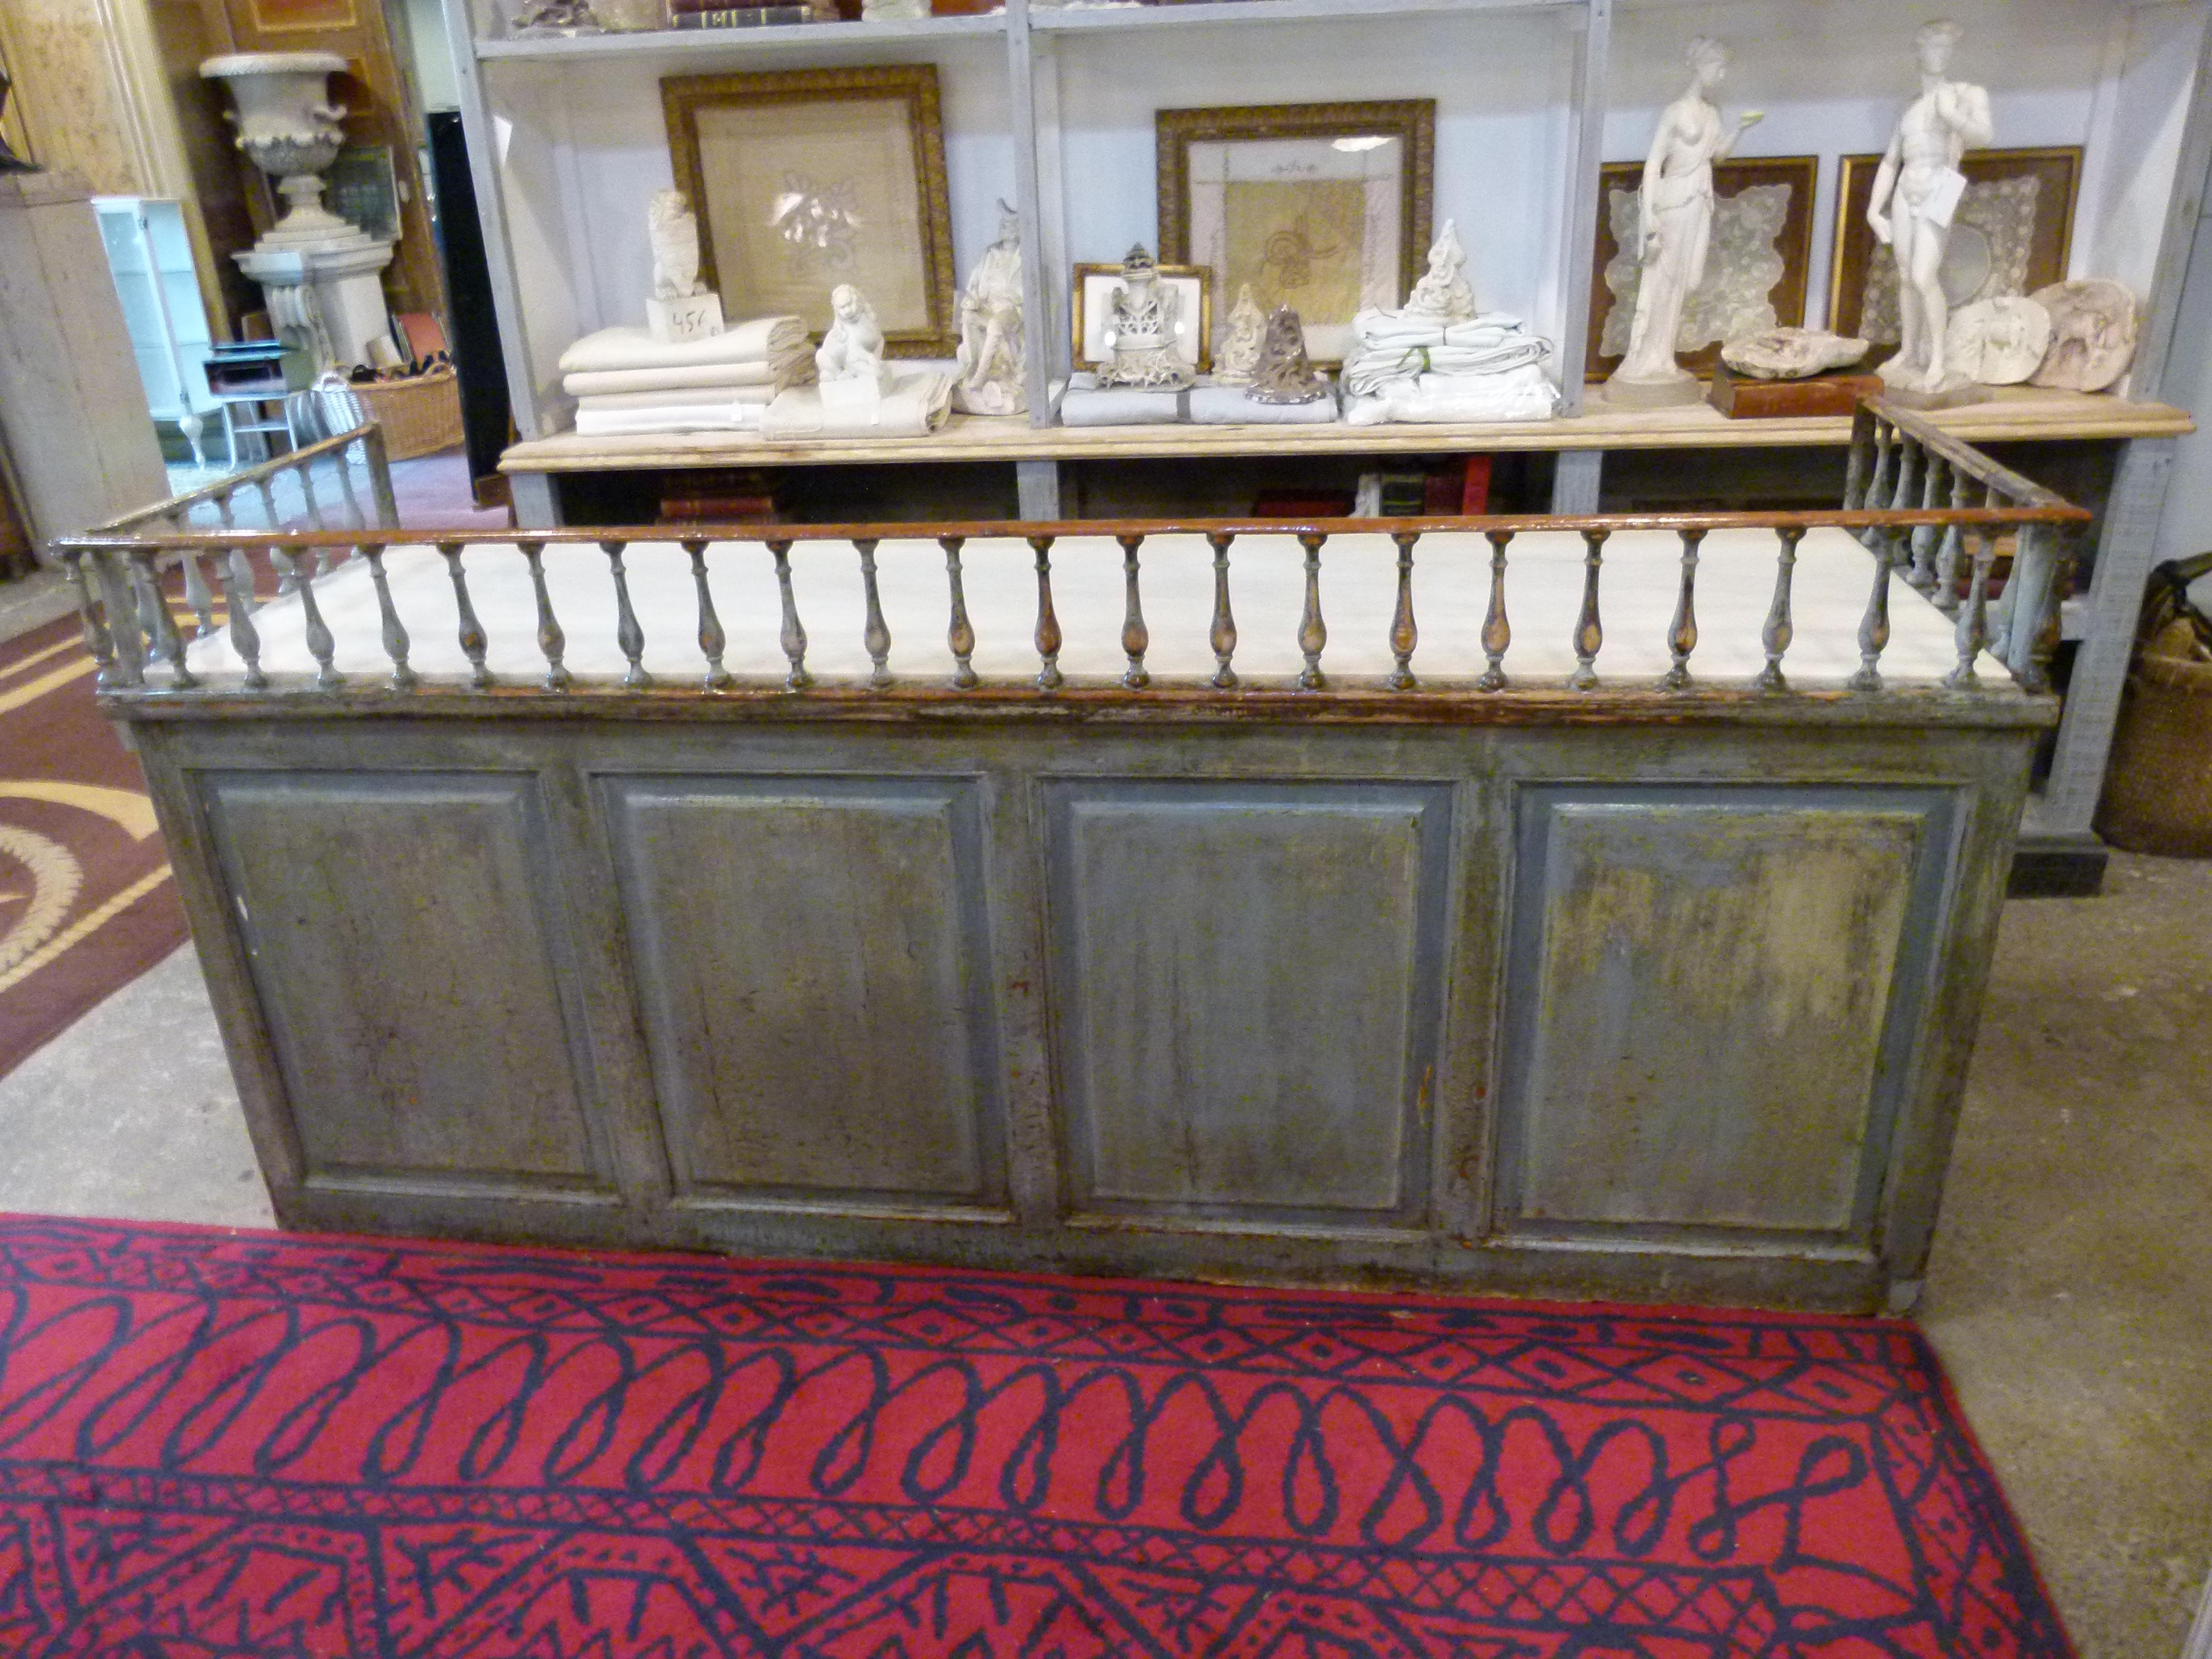 Late 18th-early 19th century hard wood bar counter with a grey /blue patina. The marble top is surrounded by a low wooden hand carved rail.

   